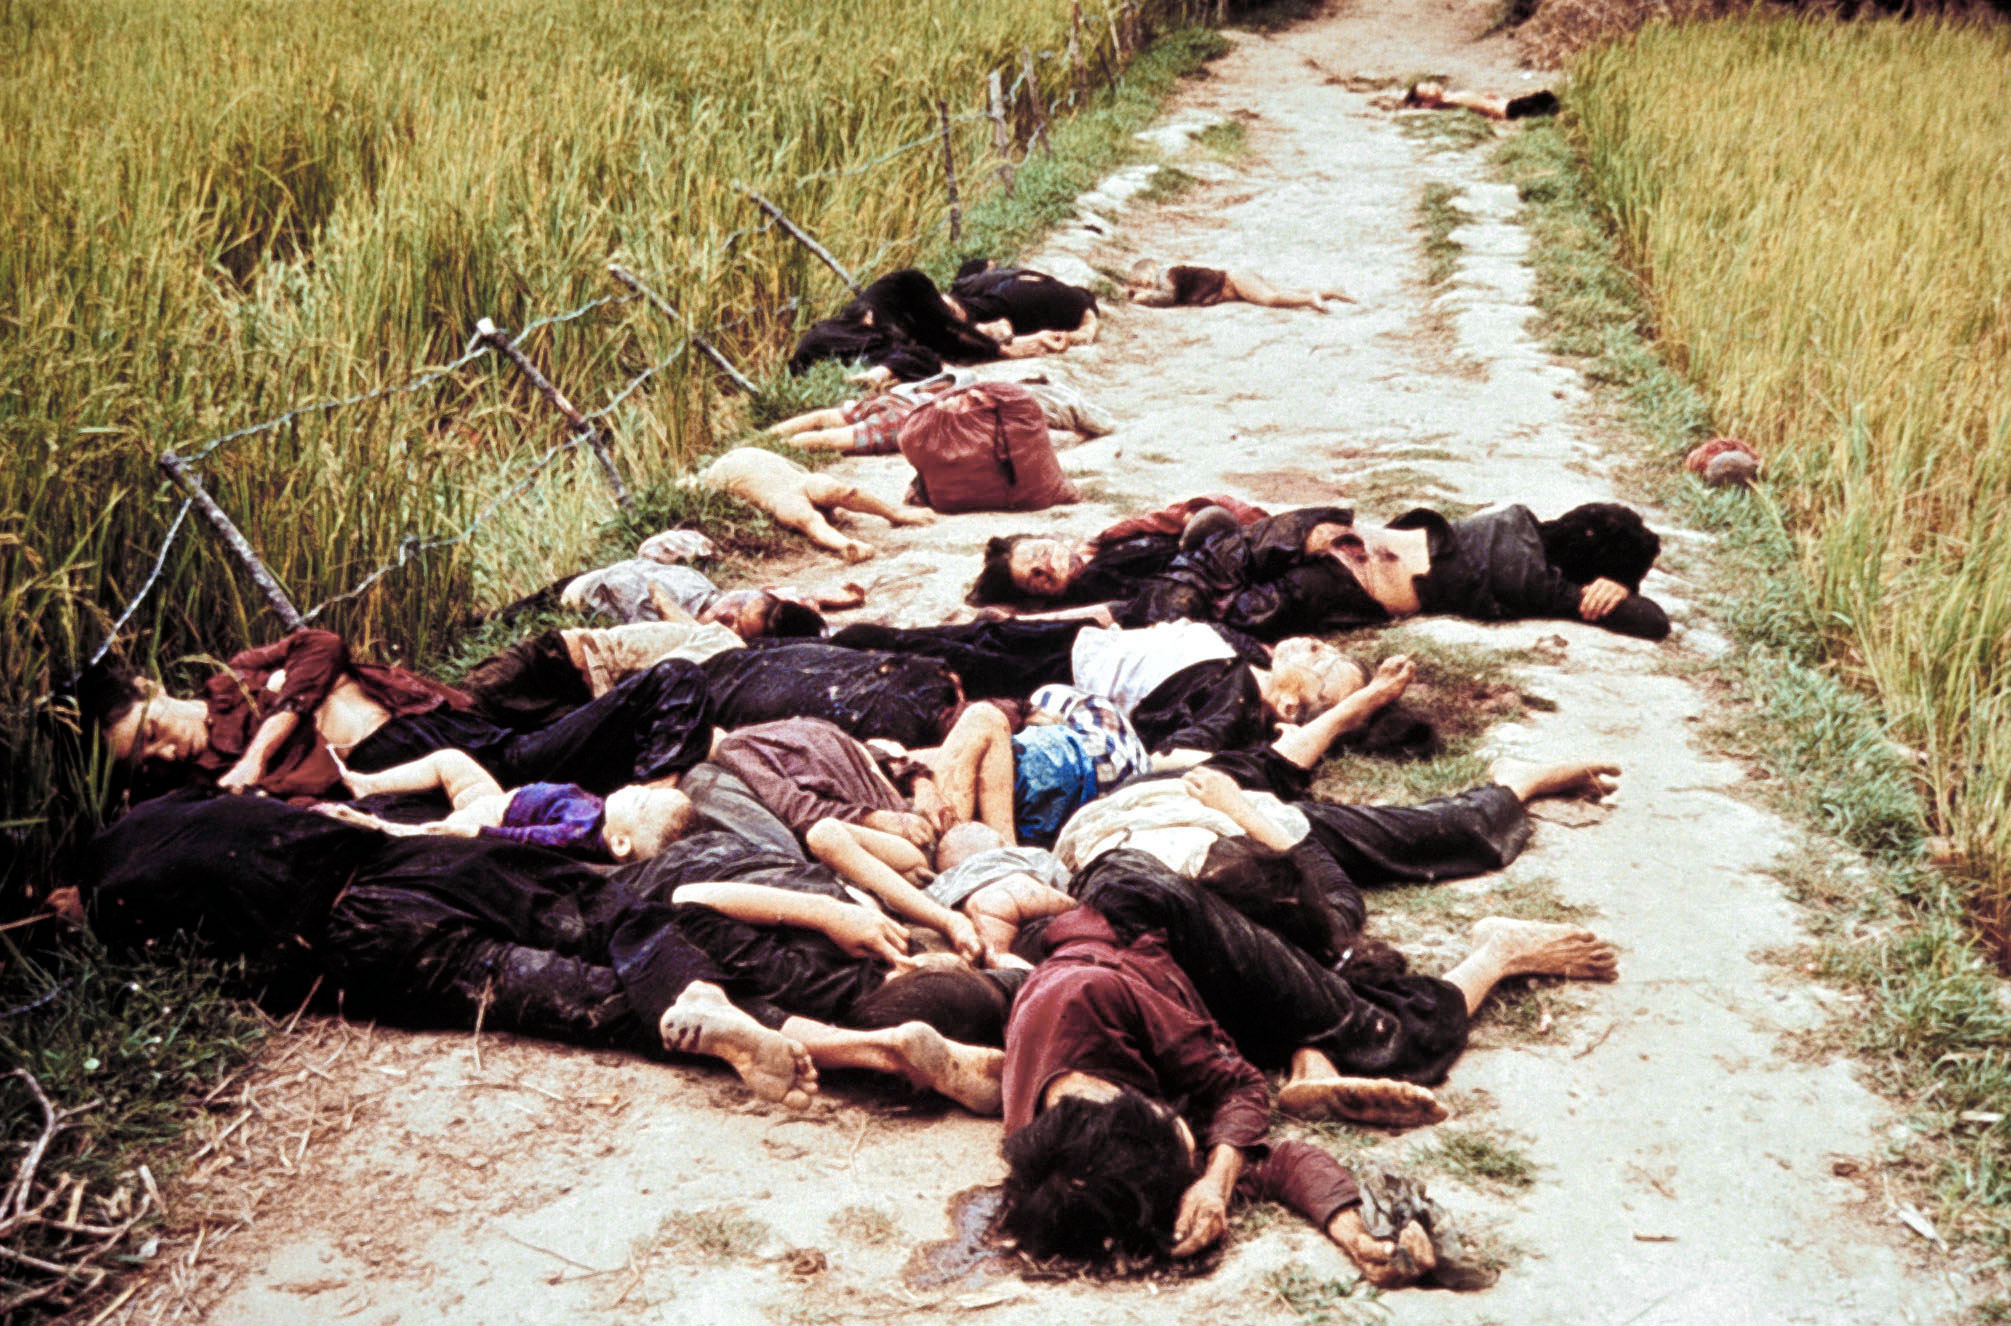 Civilians killed by the U.S. Army during a pursuit of a Vietcong militia, as per order of Lieut. William Calley Jr. It became known as the My Lai Massacre.